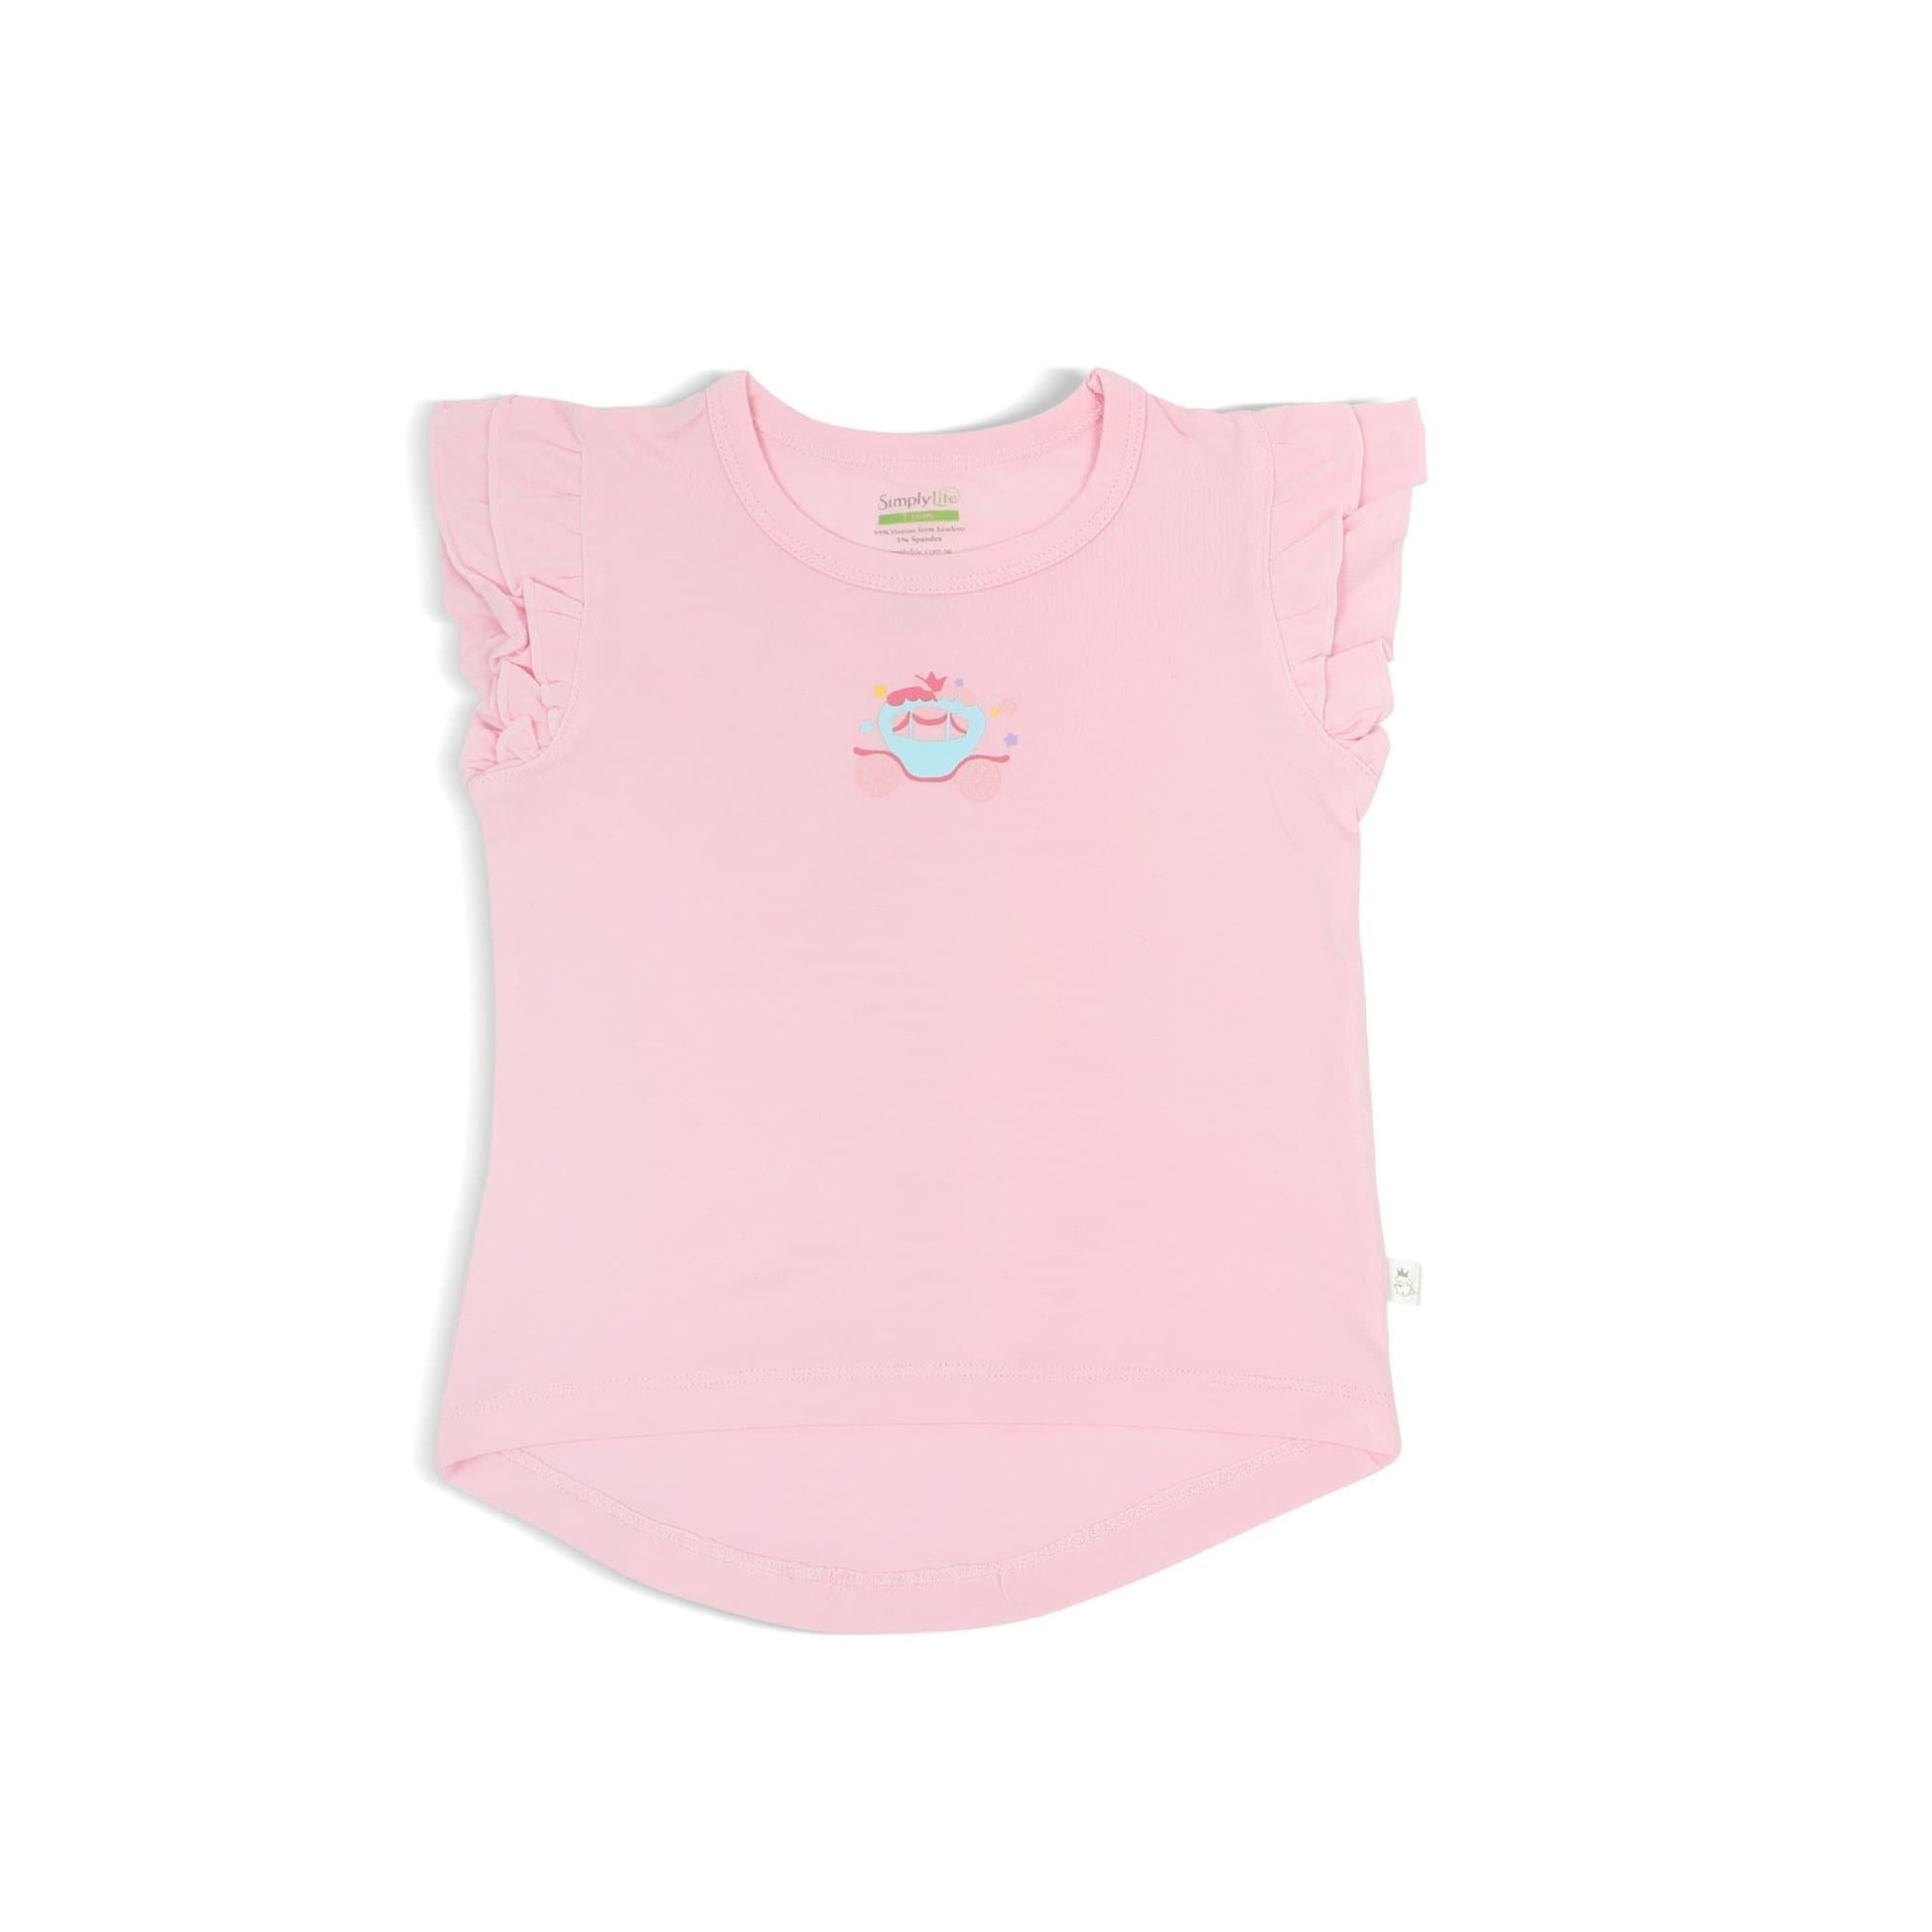 Princess - Girls' Tee with Double Frill Sleeves by simplylifebaby